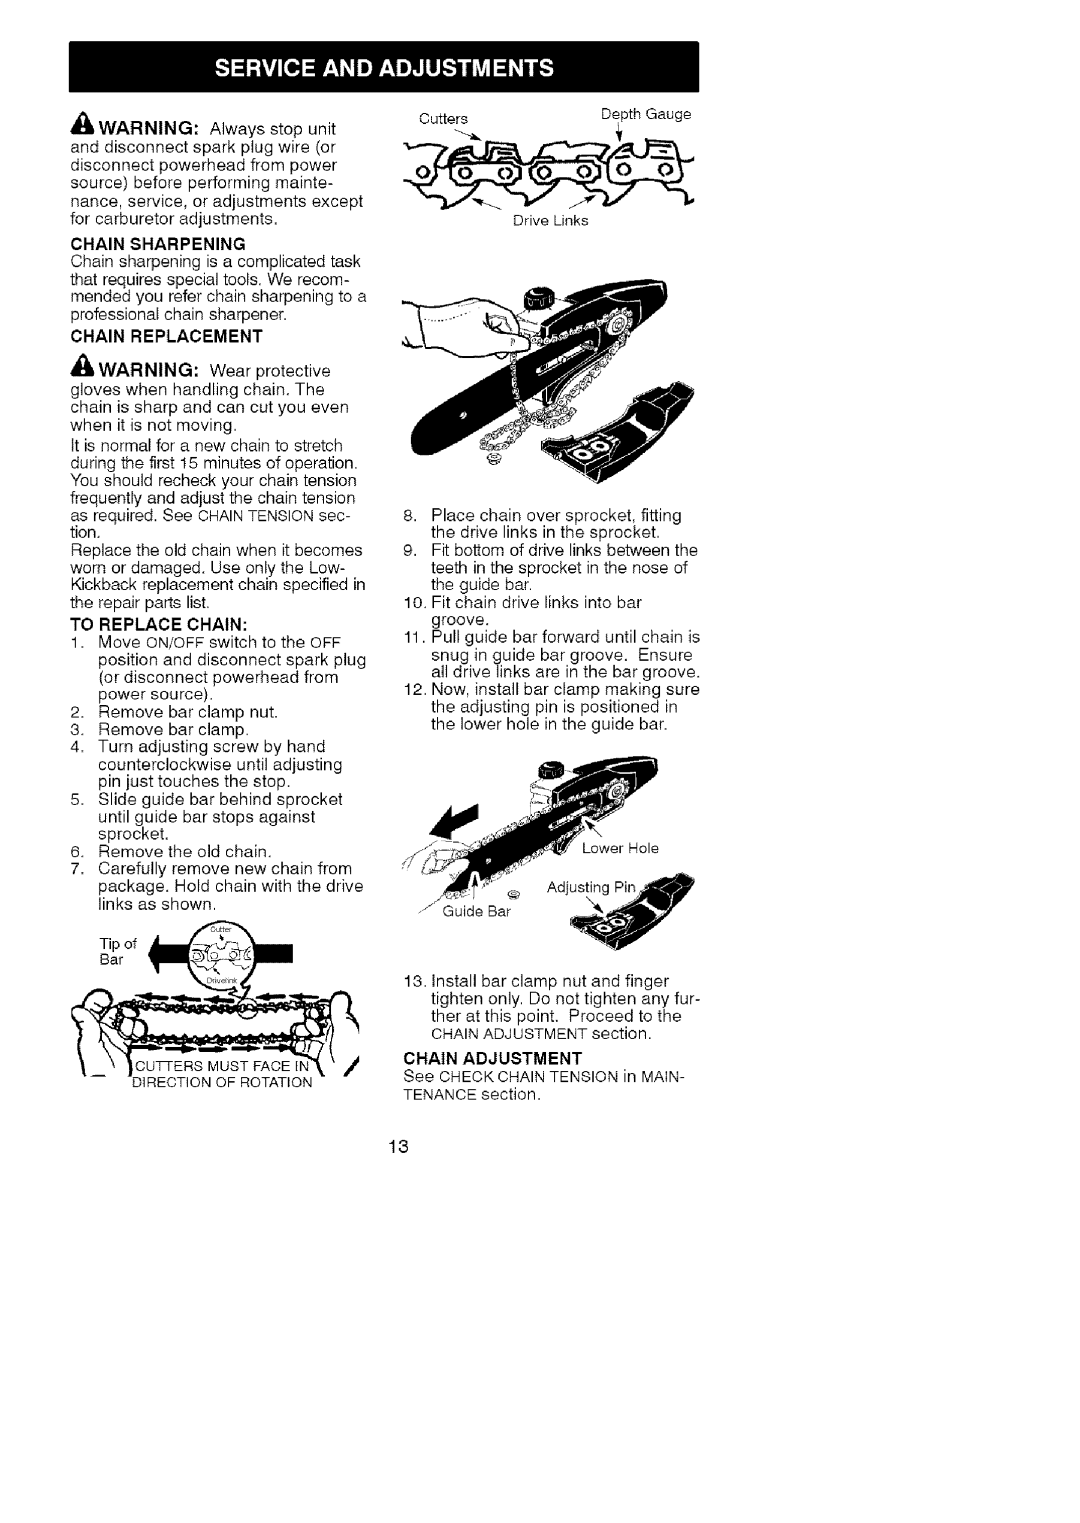 Craftsman C944.514610 instruction manual To Replace Chain, Chain Adjustment 